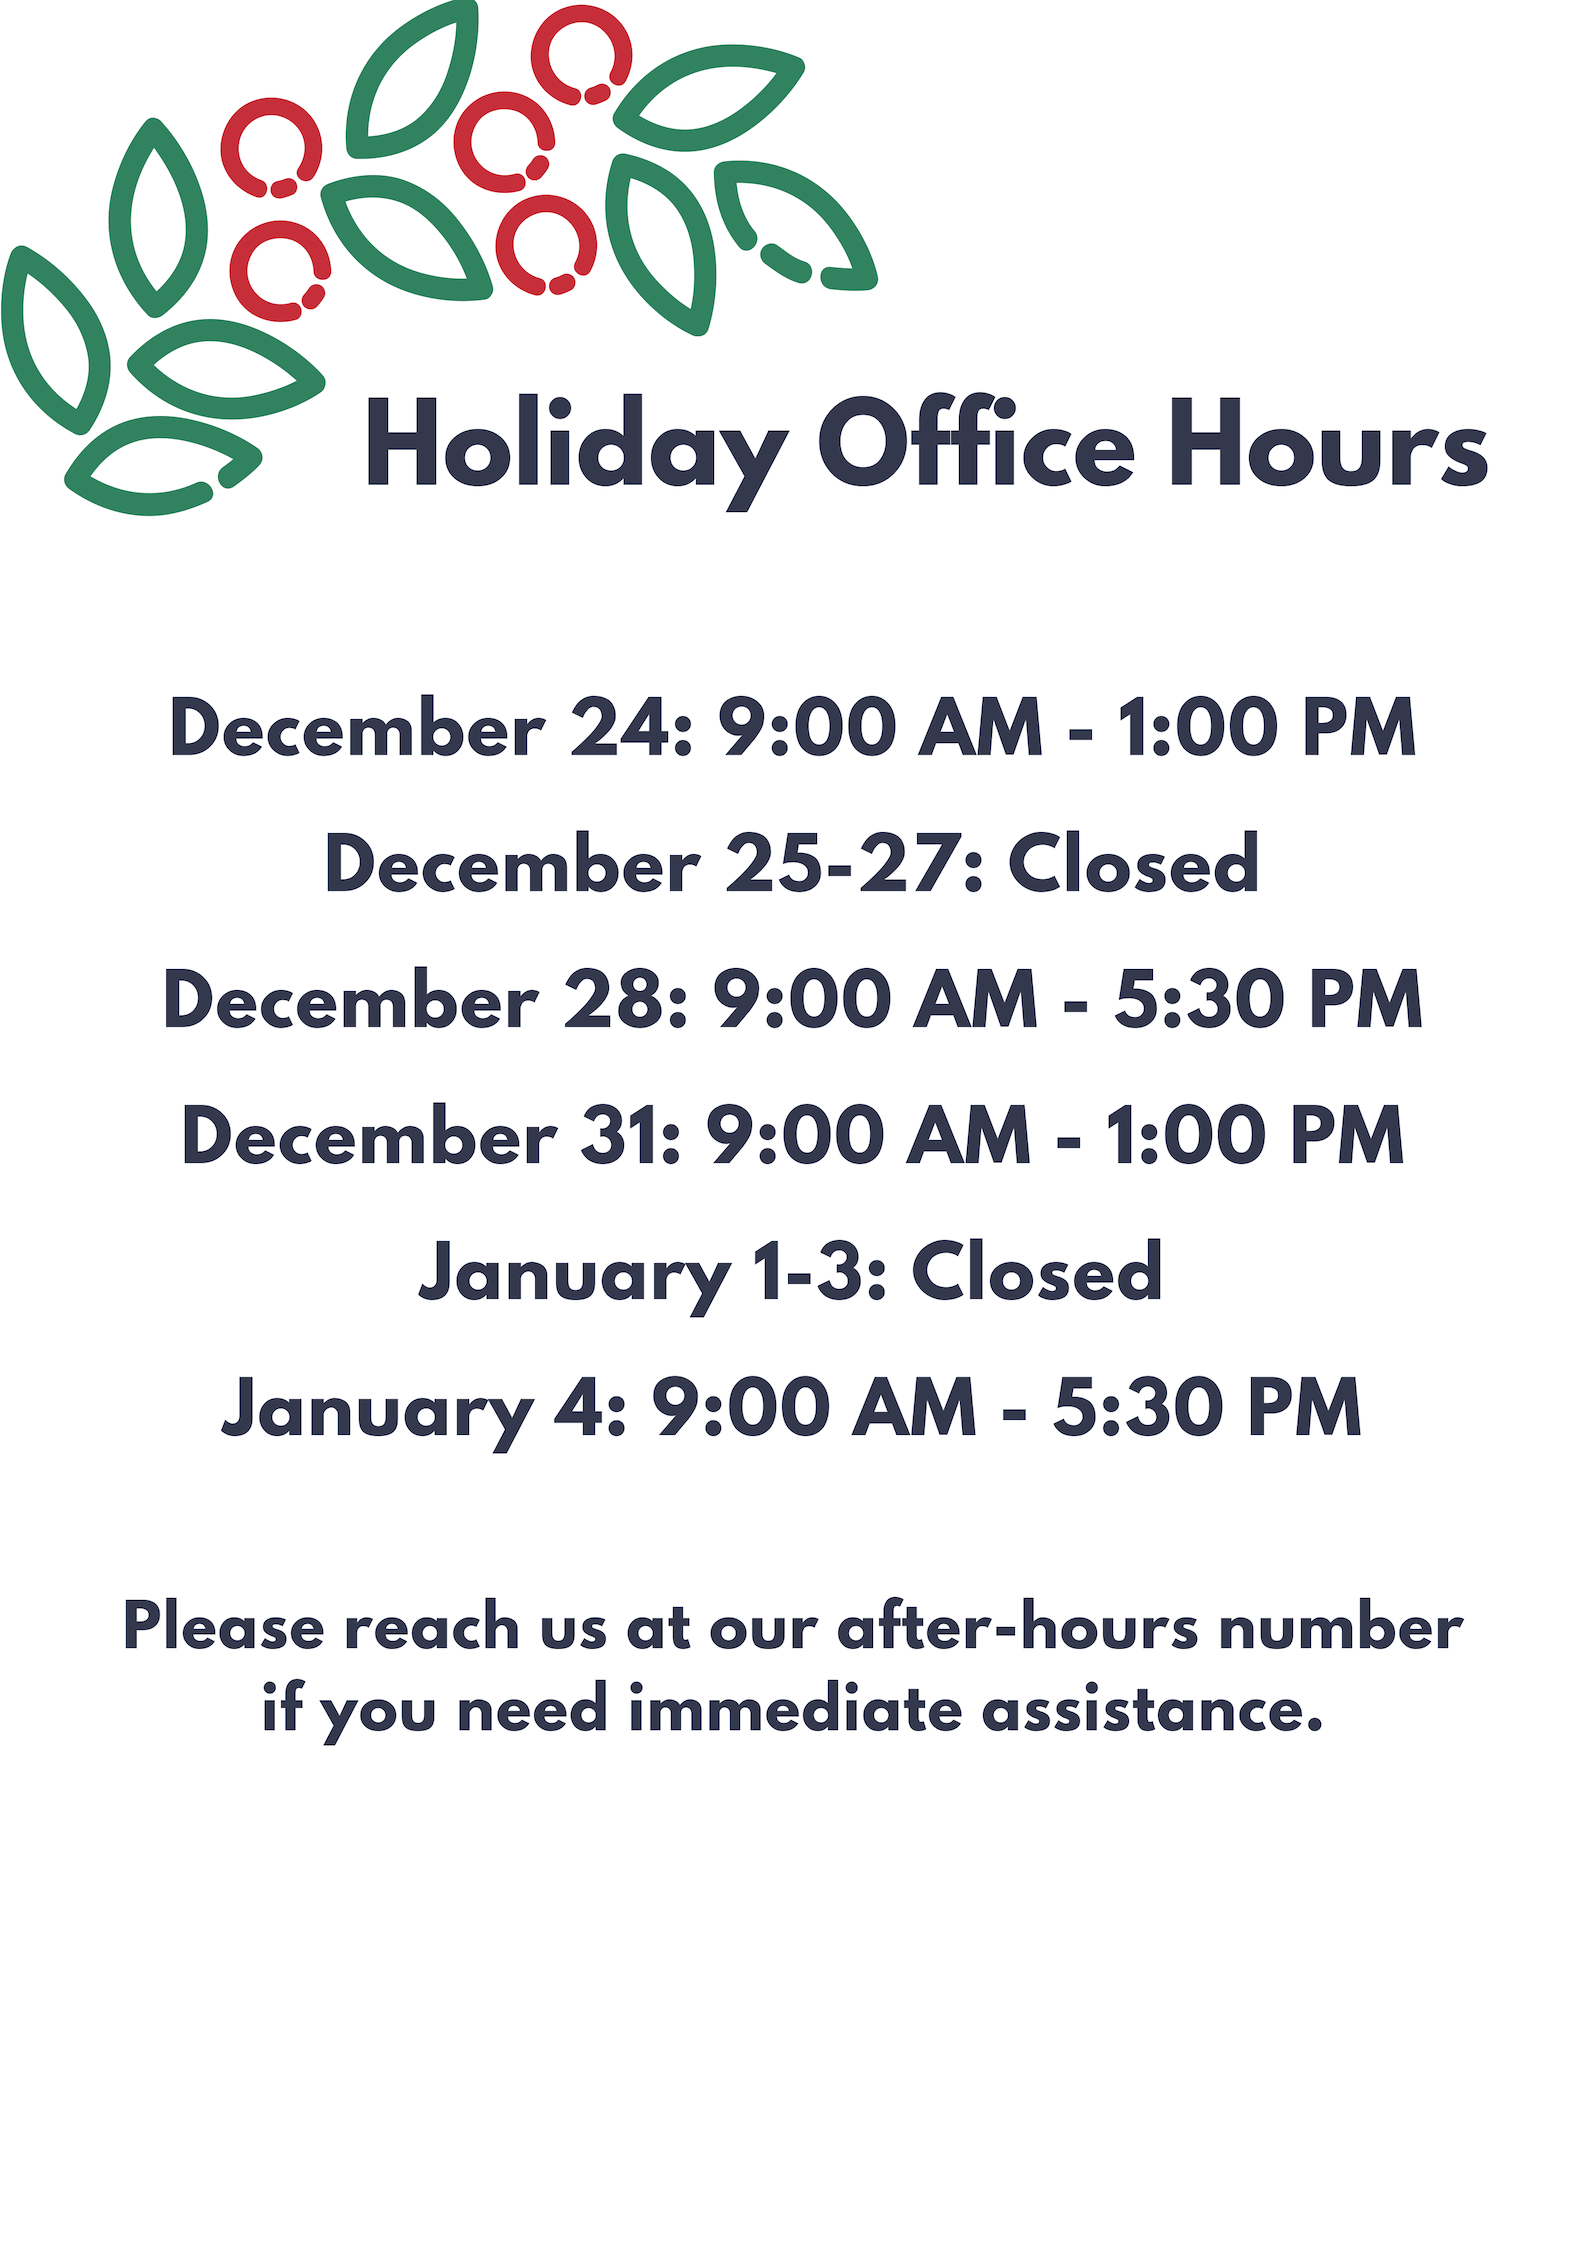 holiday-wishes-office-hours-edmonds-health-clinic